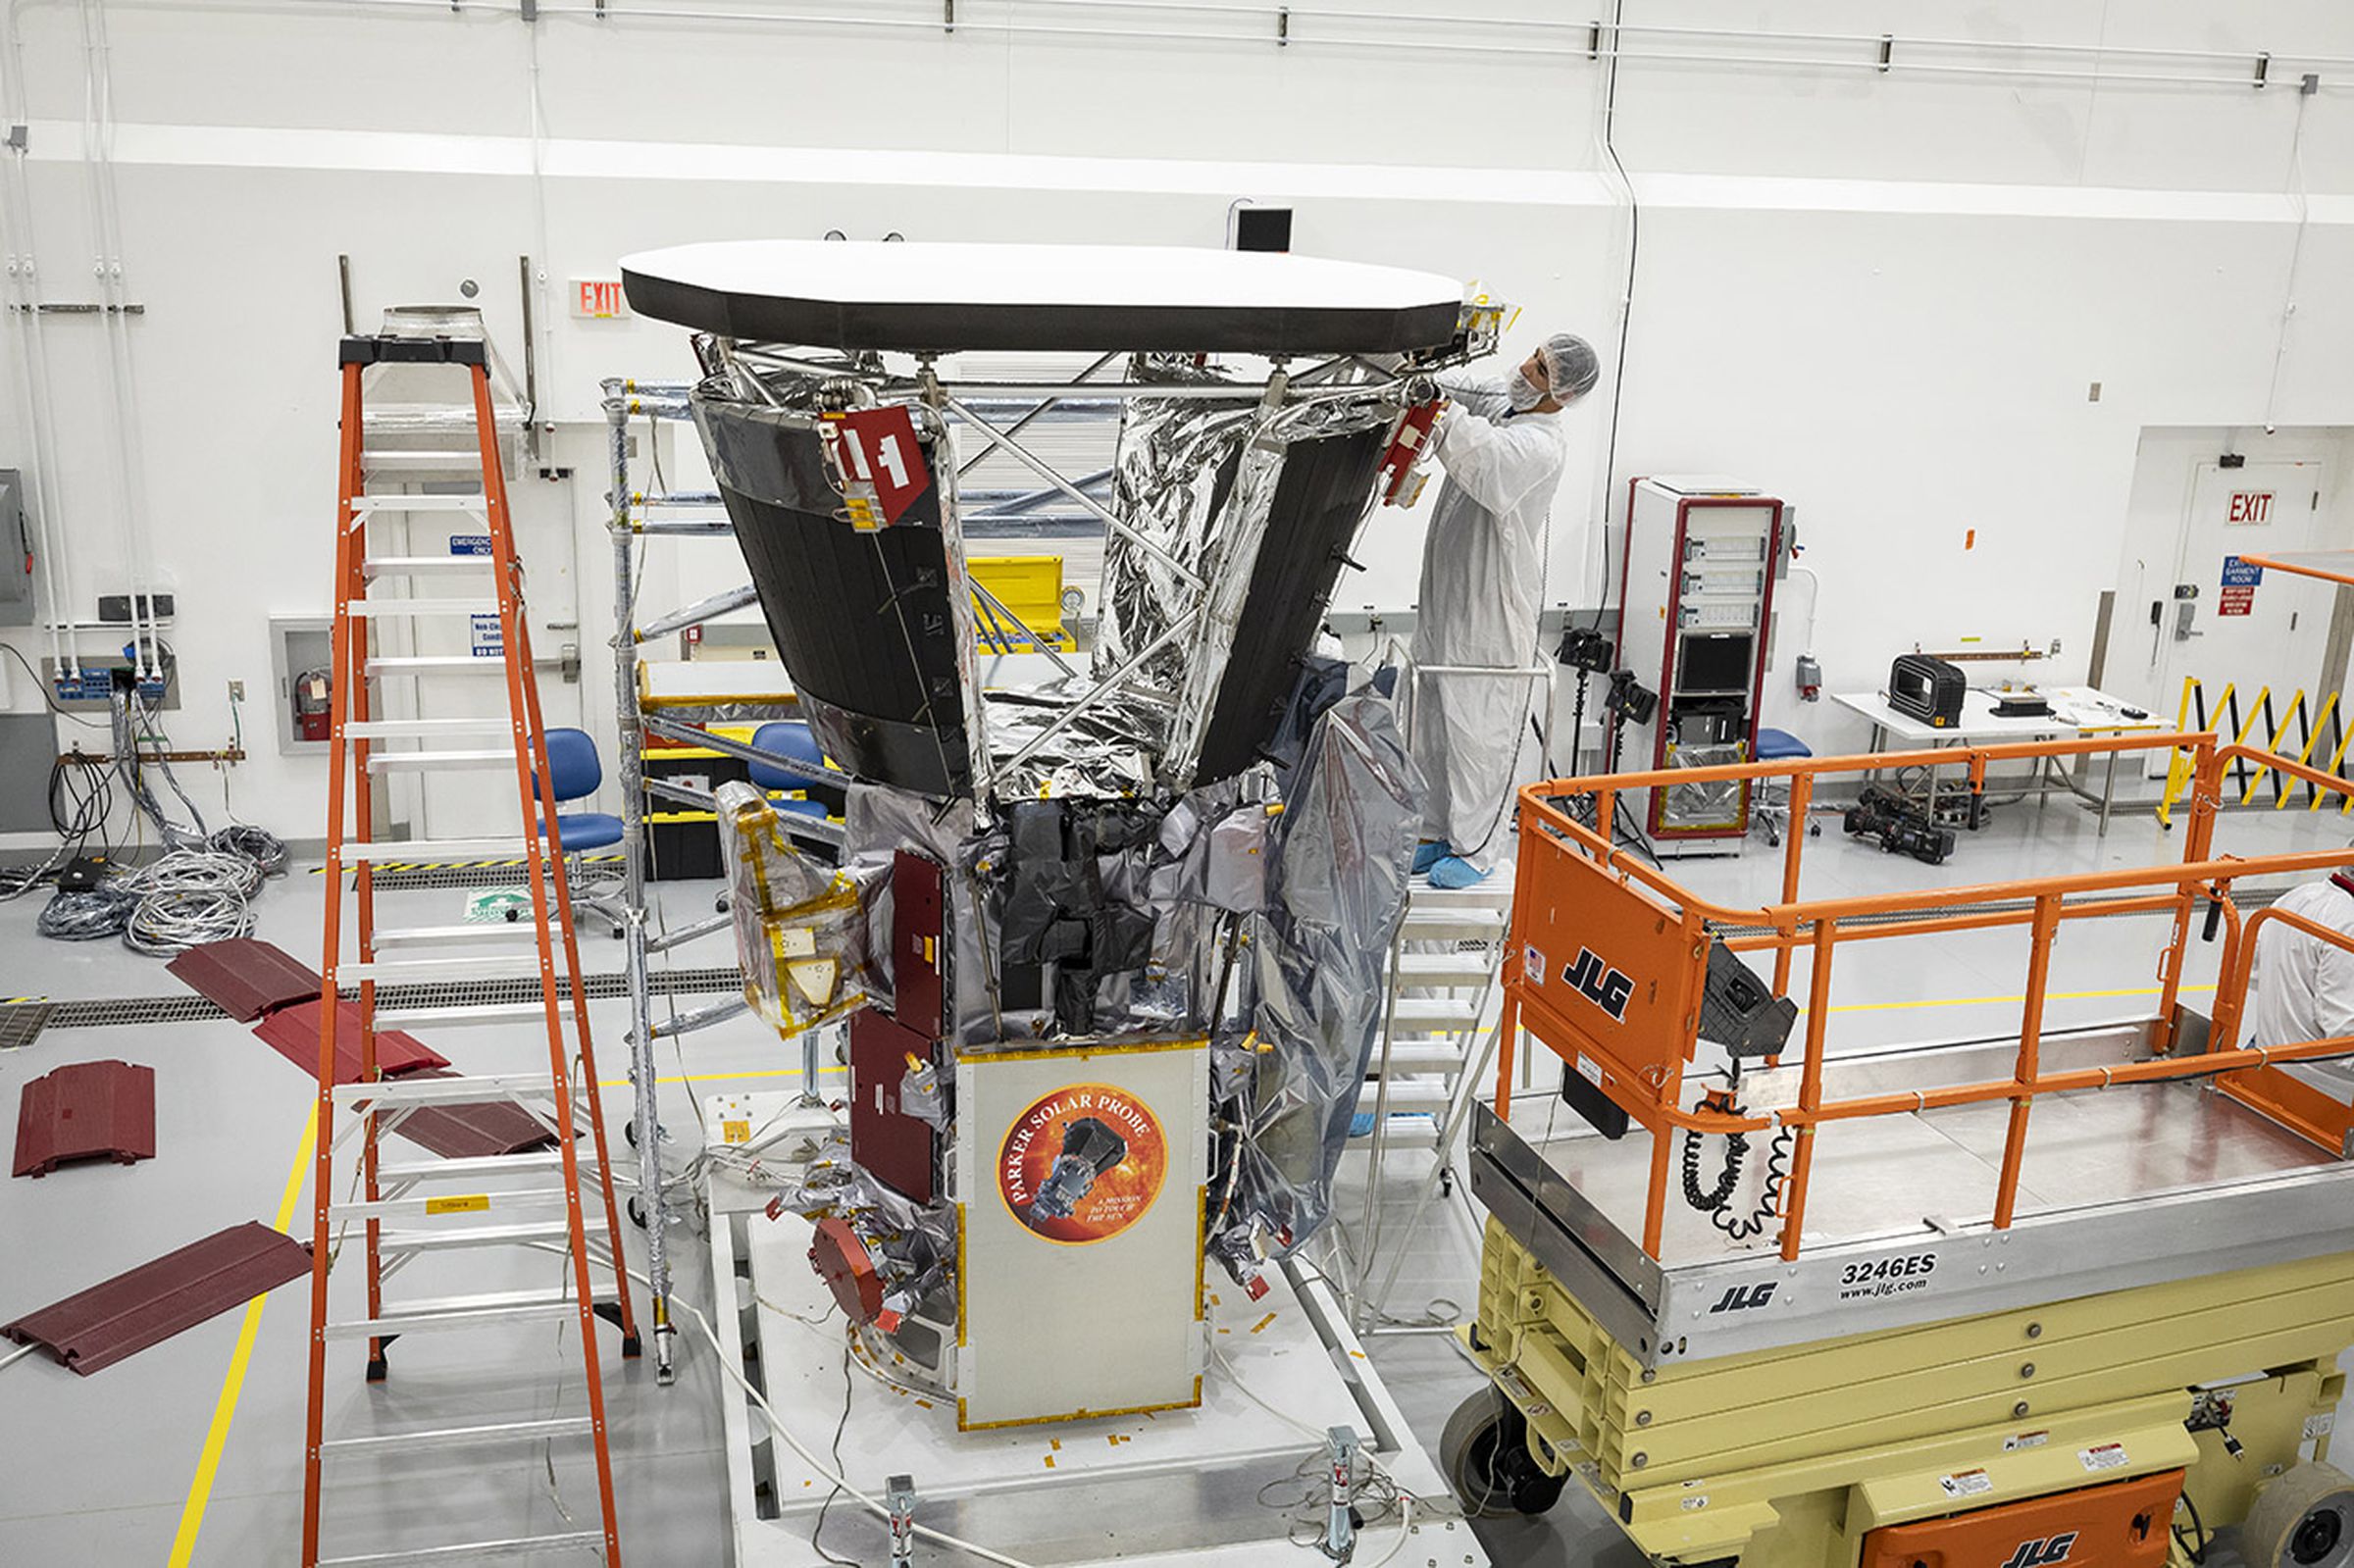 The Parker Solar Probe getting its heat shield prior to launch